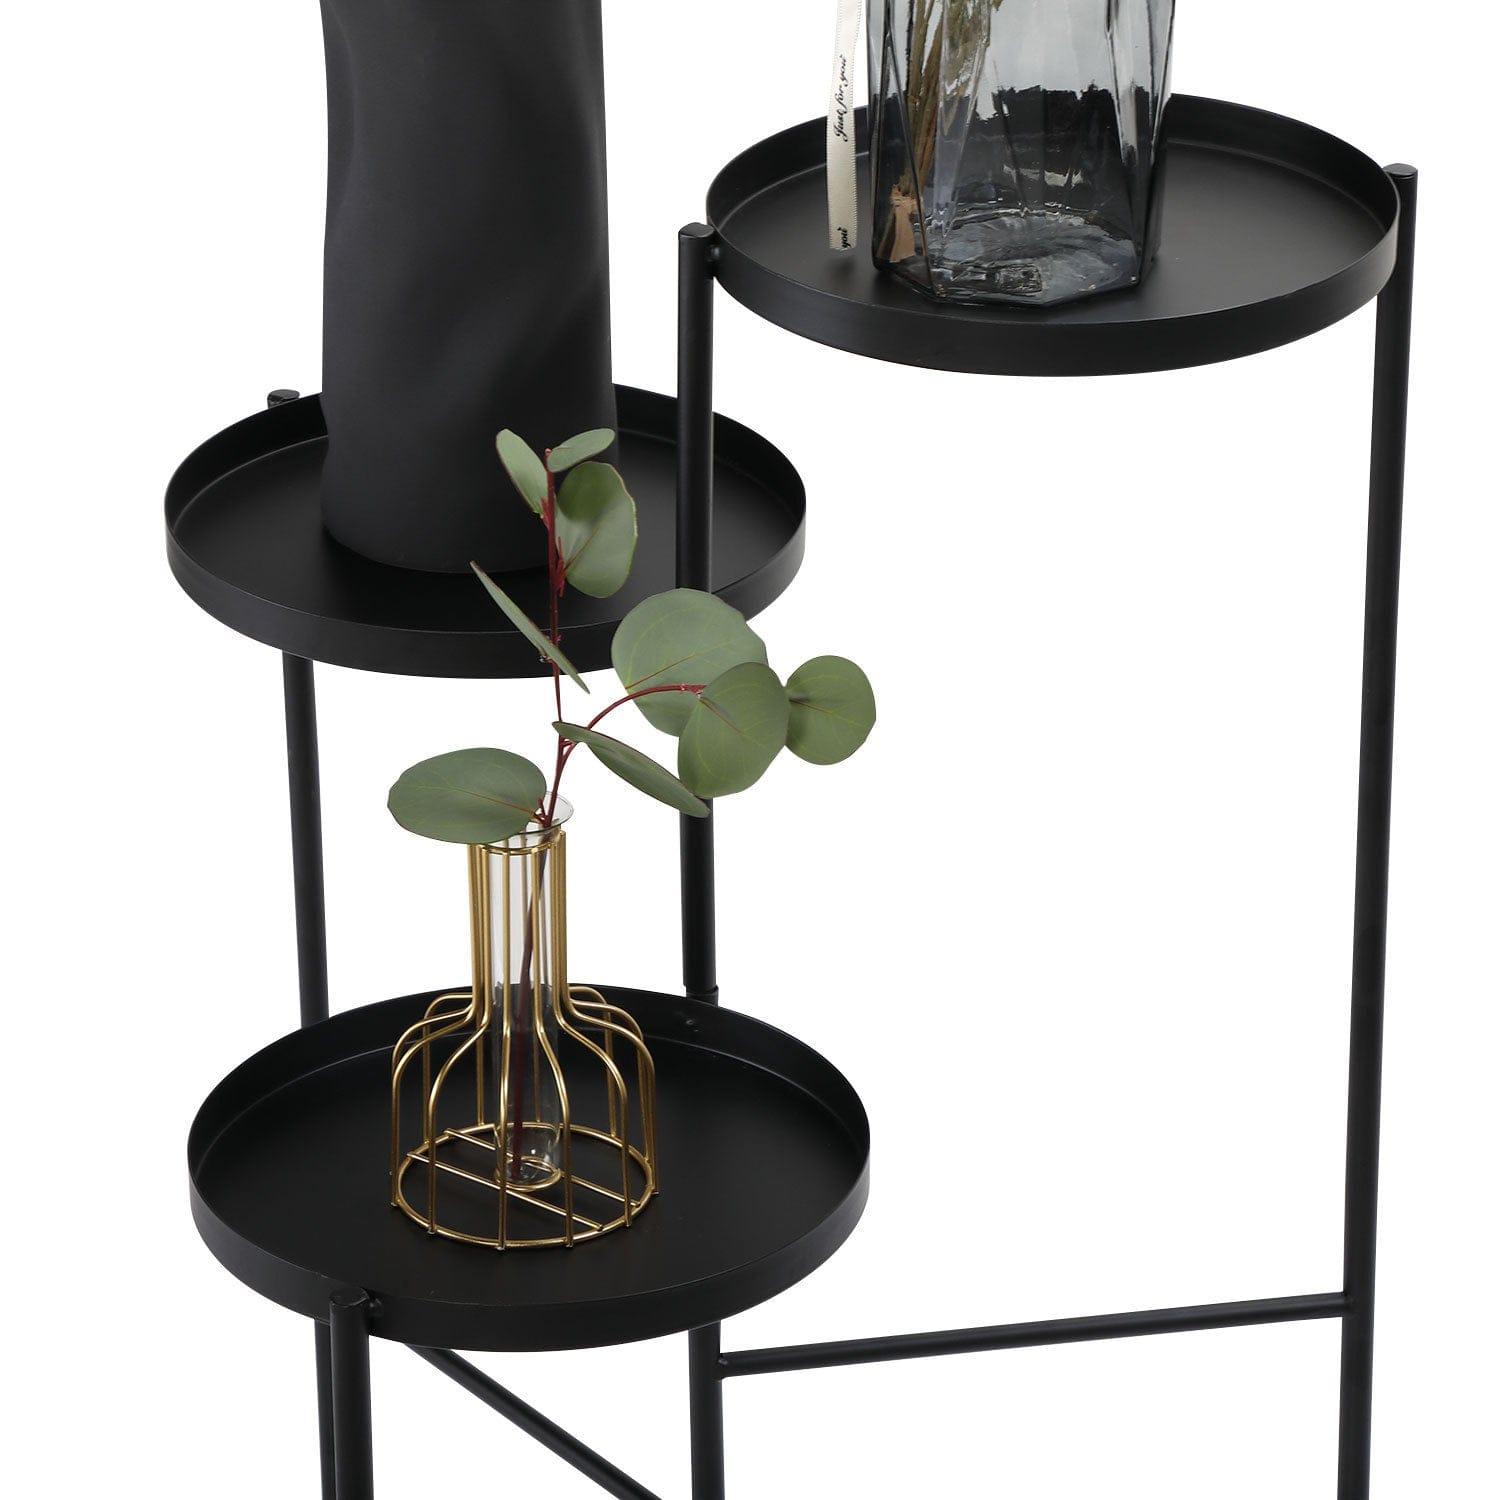 Shop Marquee 3 Tier Foldable Metal Plant Stand Mademoiselle Home Decor